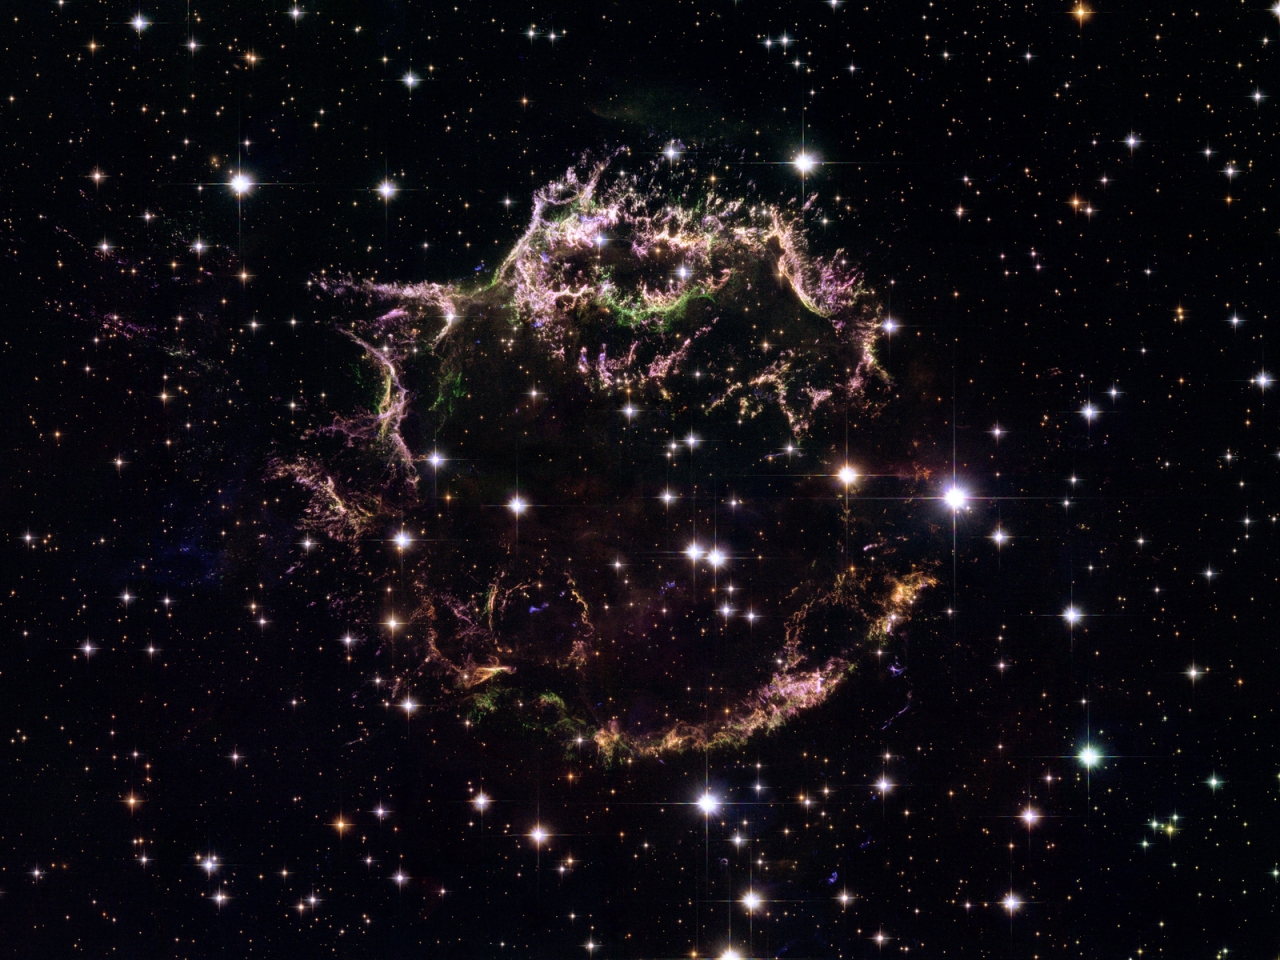 Cassiopeia for 1280 x 960 resolution